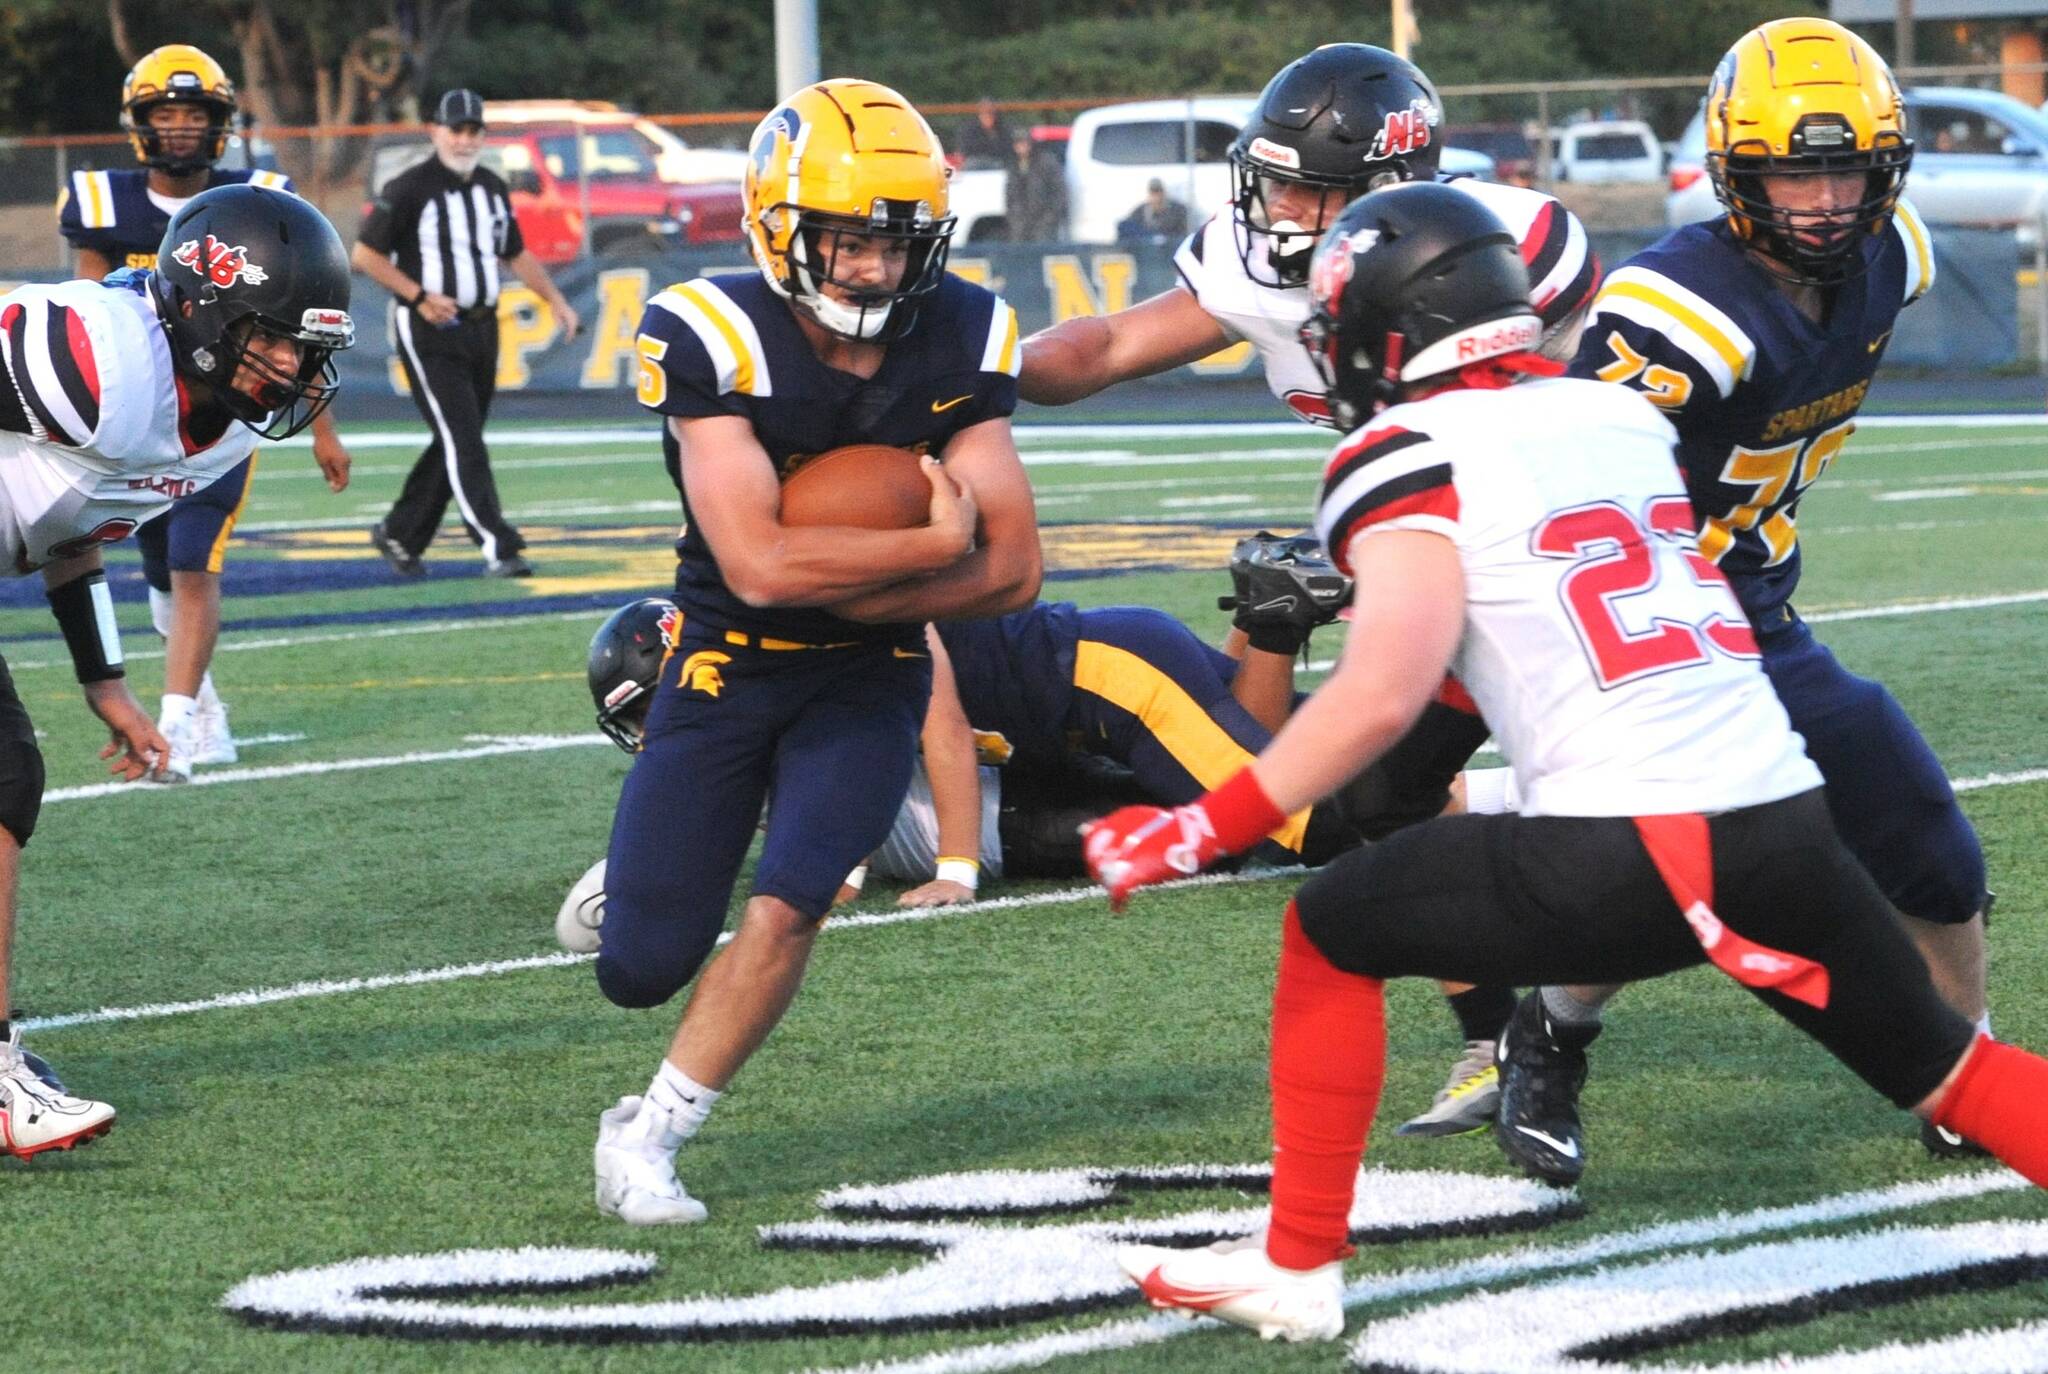 Forks’ Landin Davis (5) runs through a host of Red Devils as he faces Neah Bay’s JQ Johnson (23). Also in the action is Forks’ Jeremy Hutto (72). (Lonnie Archibald/for Peninsula Daily News)